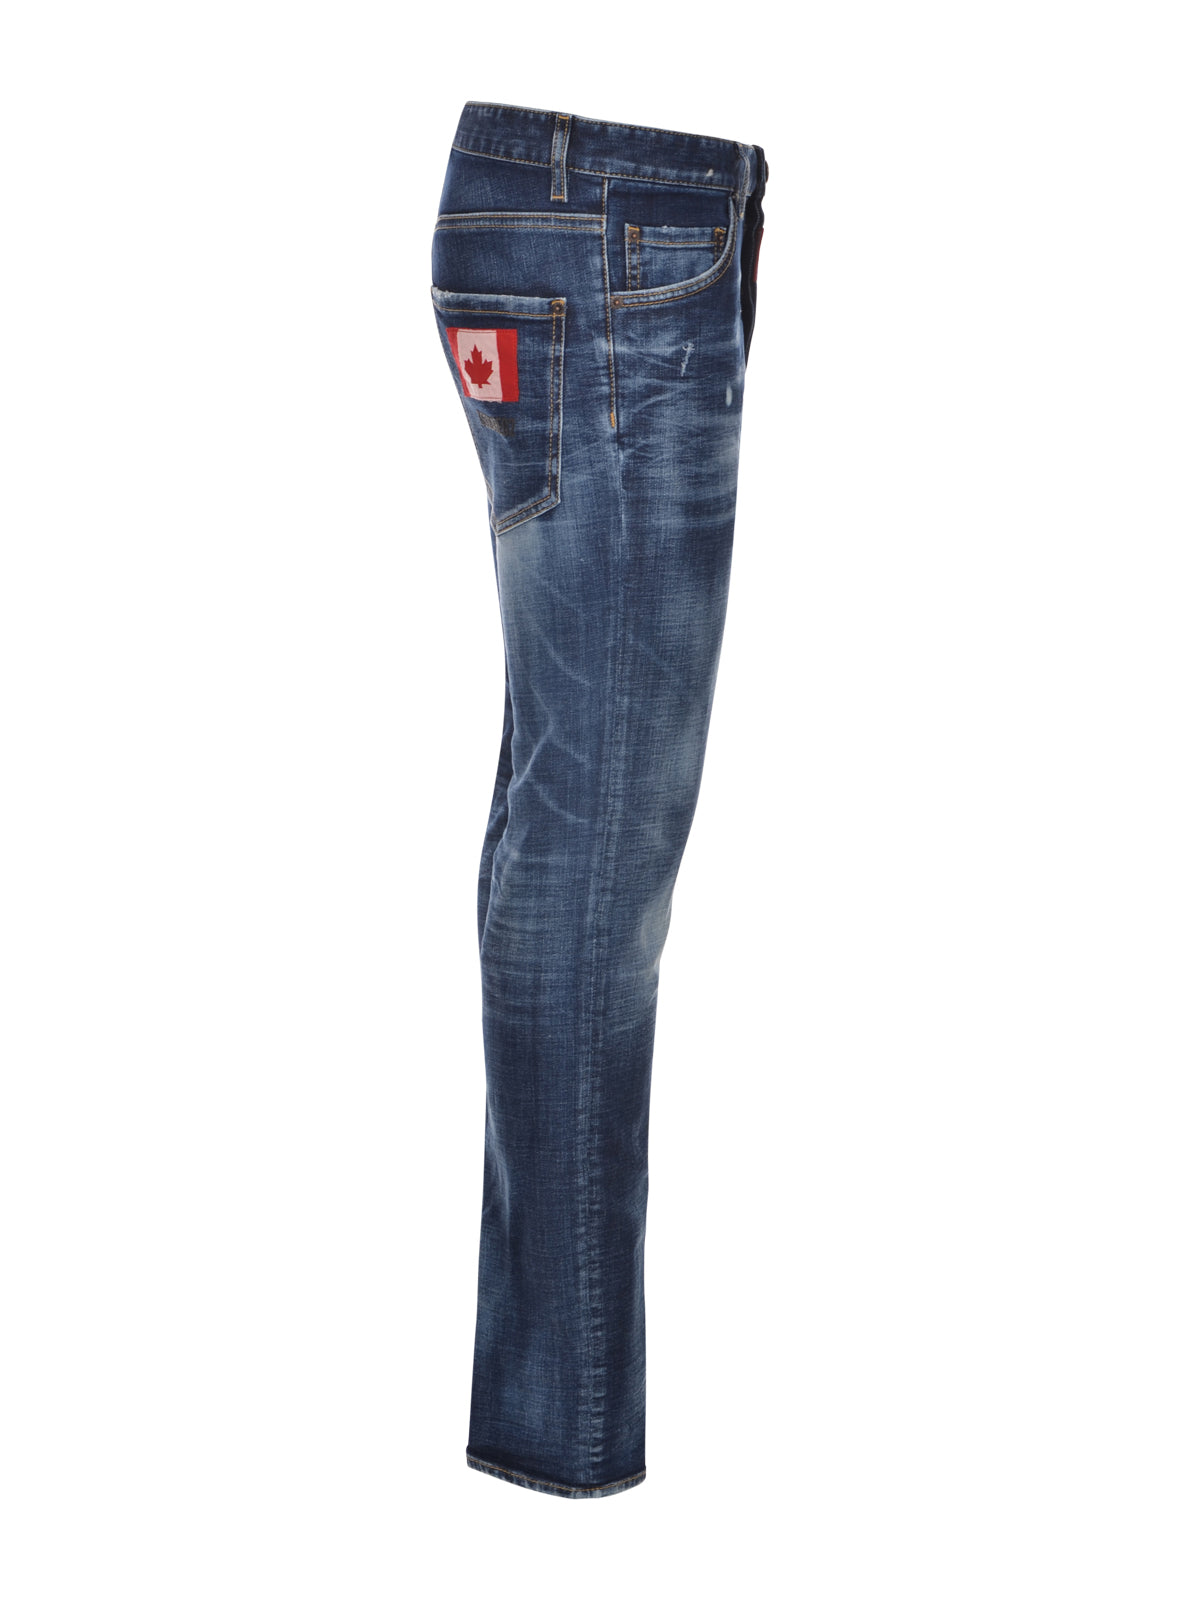 DSQUARED2: jeans with multi patches - Denim  Dsquared2 jeans S74LB0811  S30664 online at